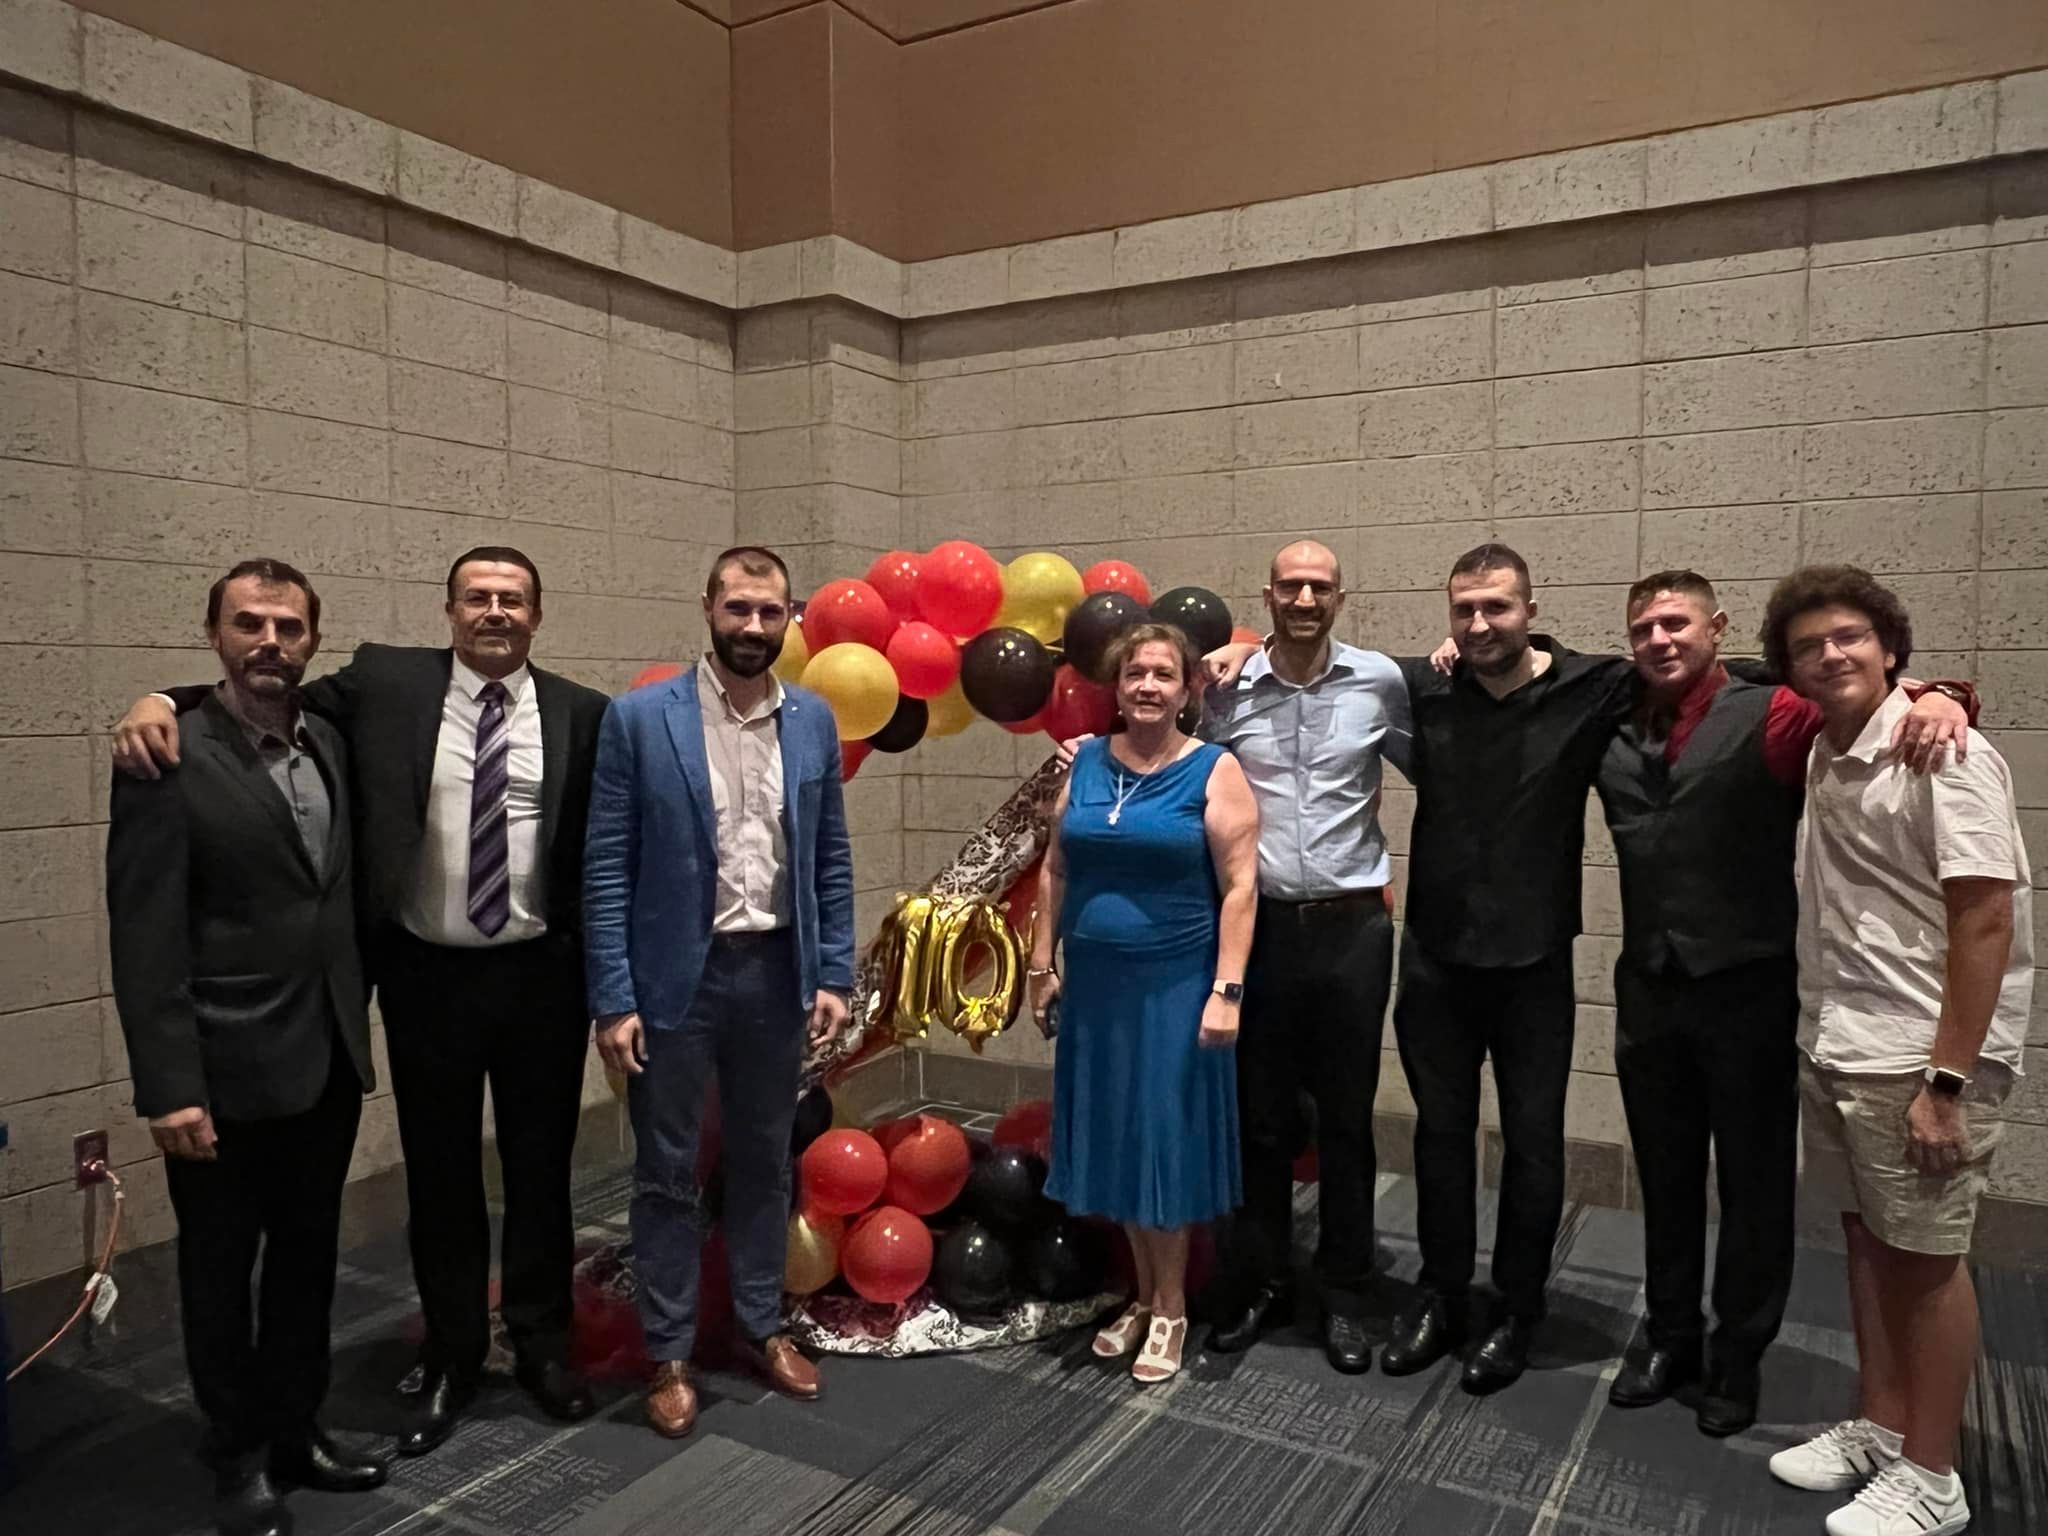 The Macedonian Patriotic Organization in the United States and Canada celebrated its 100th anniversary in Fort Wayne, Indiana